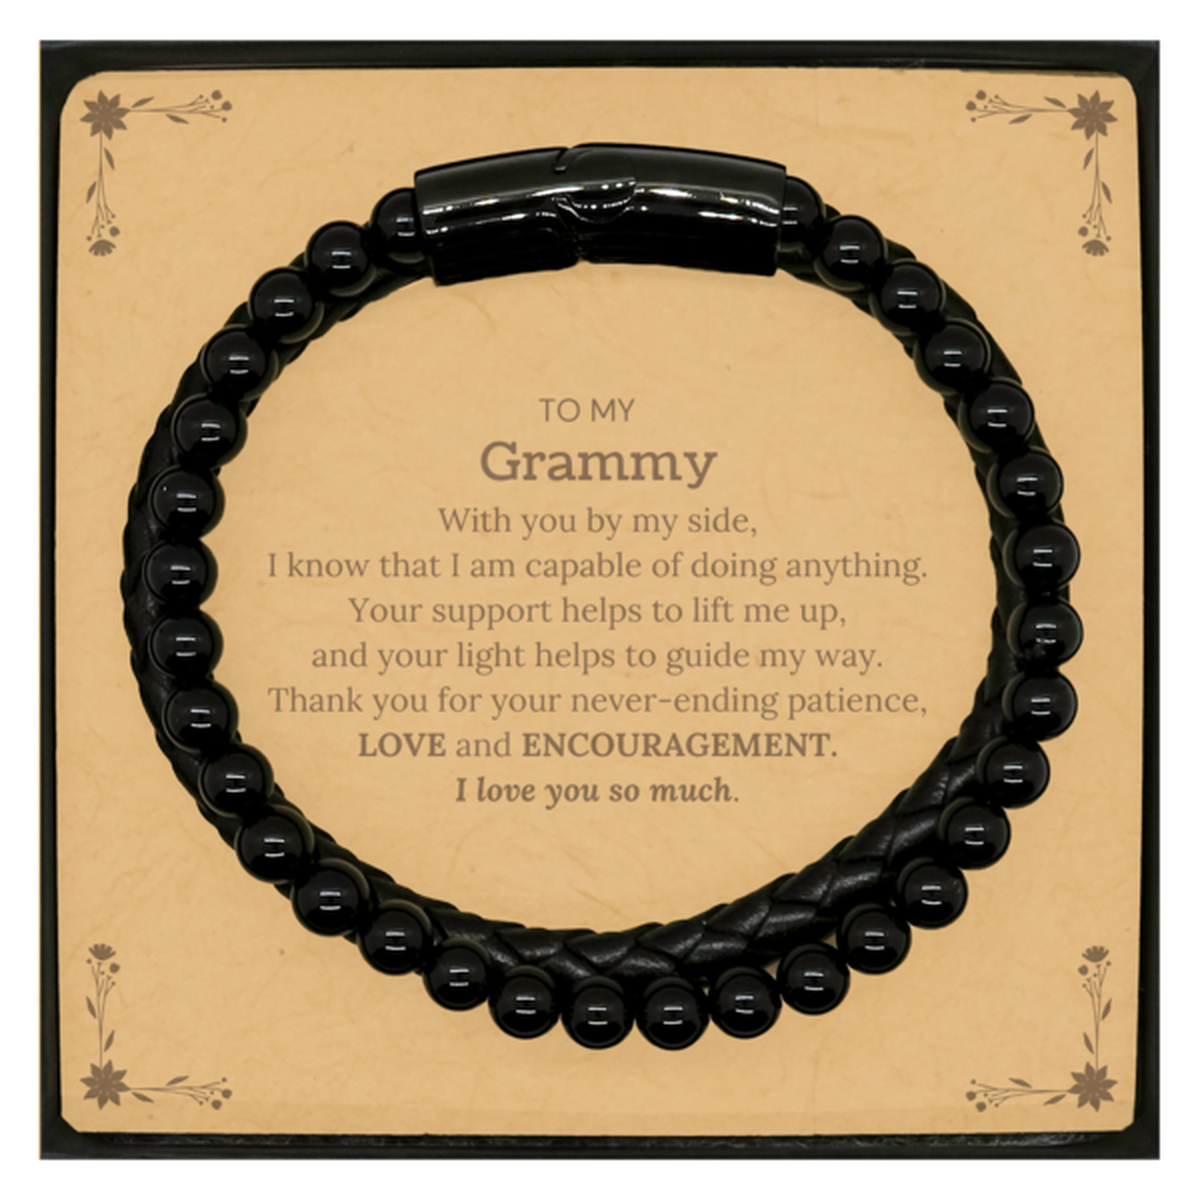 Appreciation Grammy Stone Leather Bracelets Gifts, To My Grammy Birthday Christmas Wedding Keepsake Gifts for Grammy With you by my side, I know that I am capable of doing anything. I love you so much